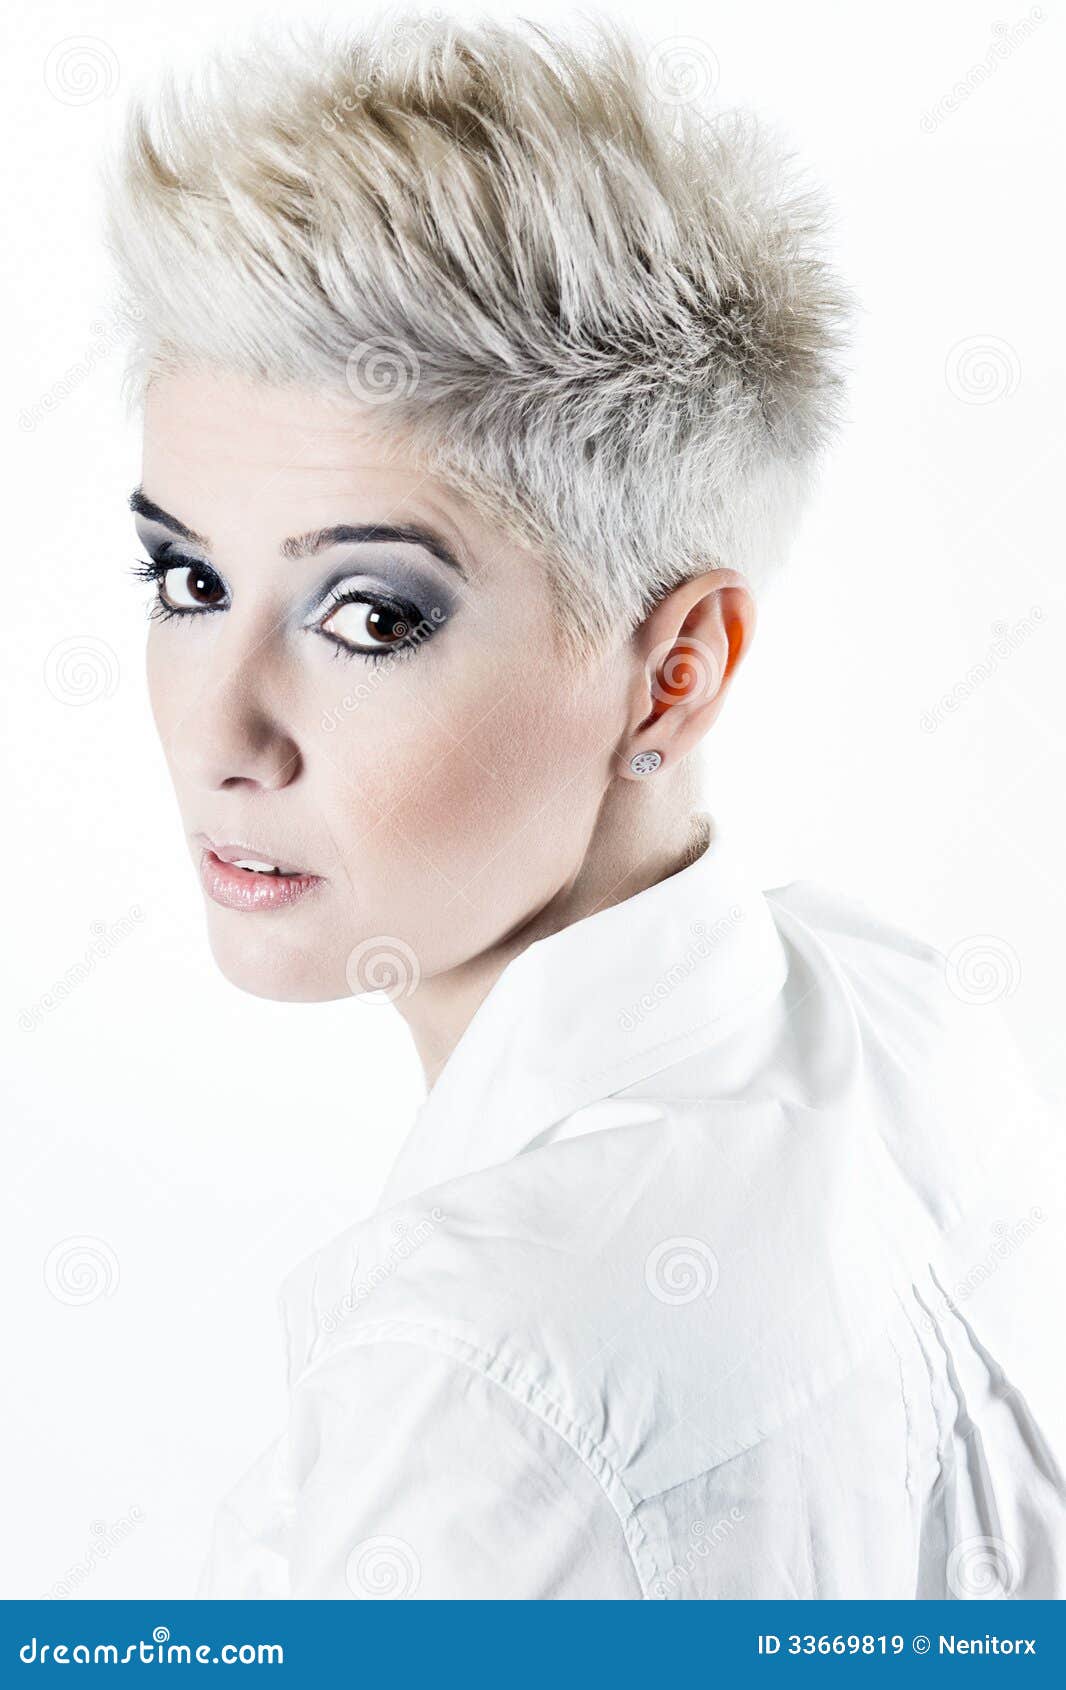 Short Hair With White